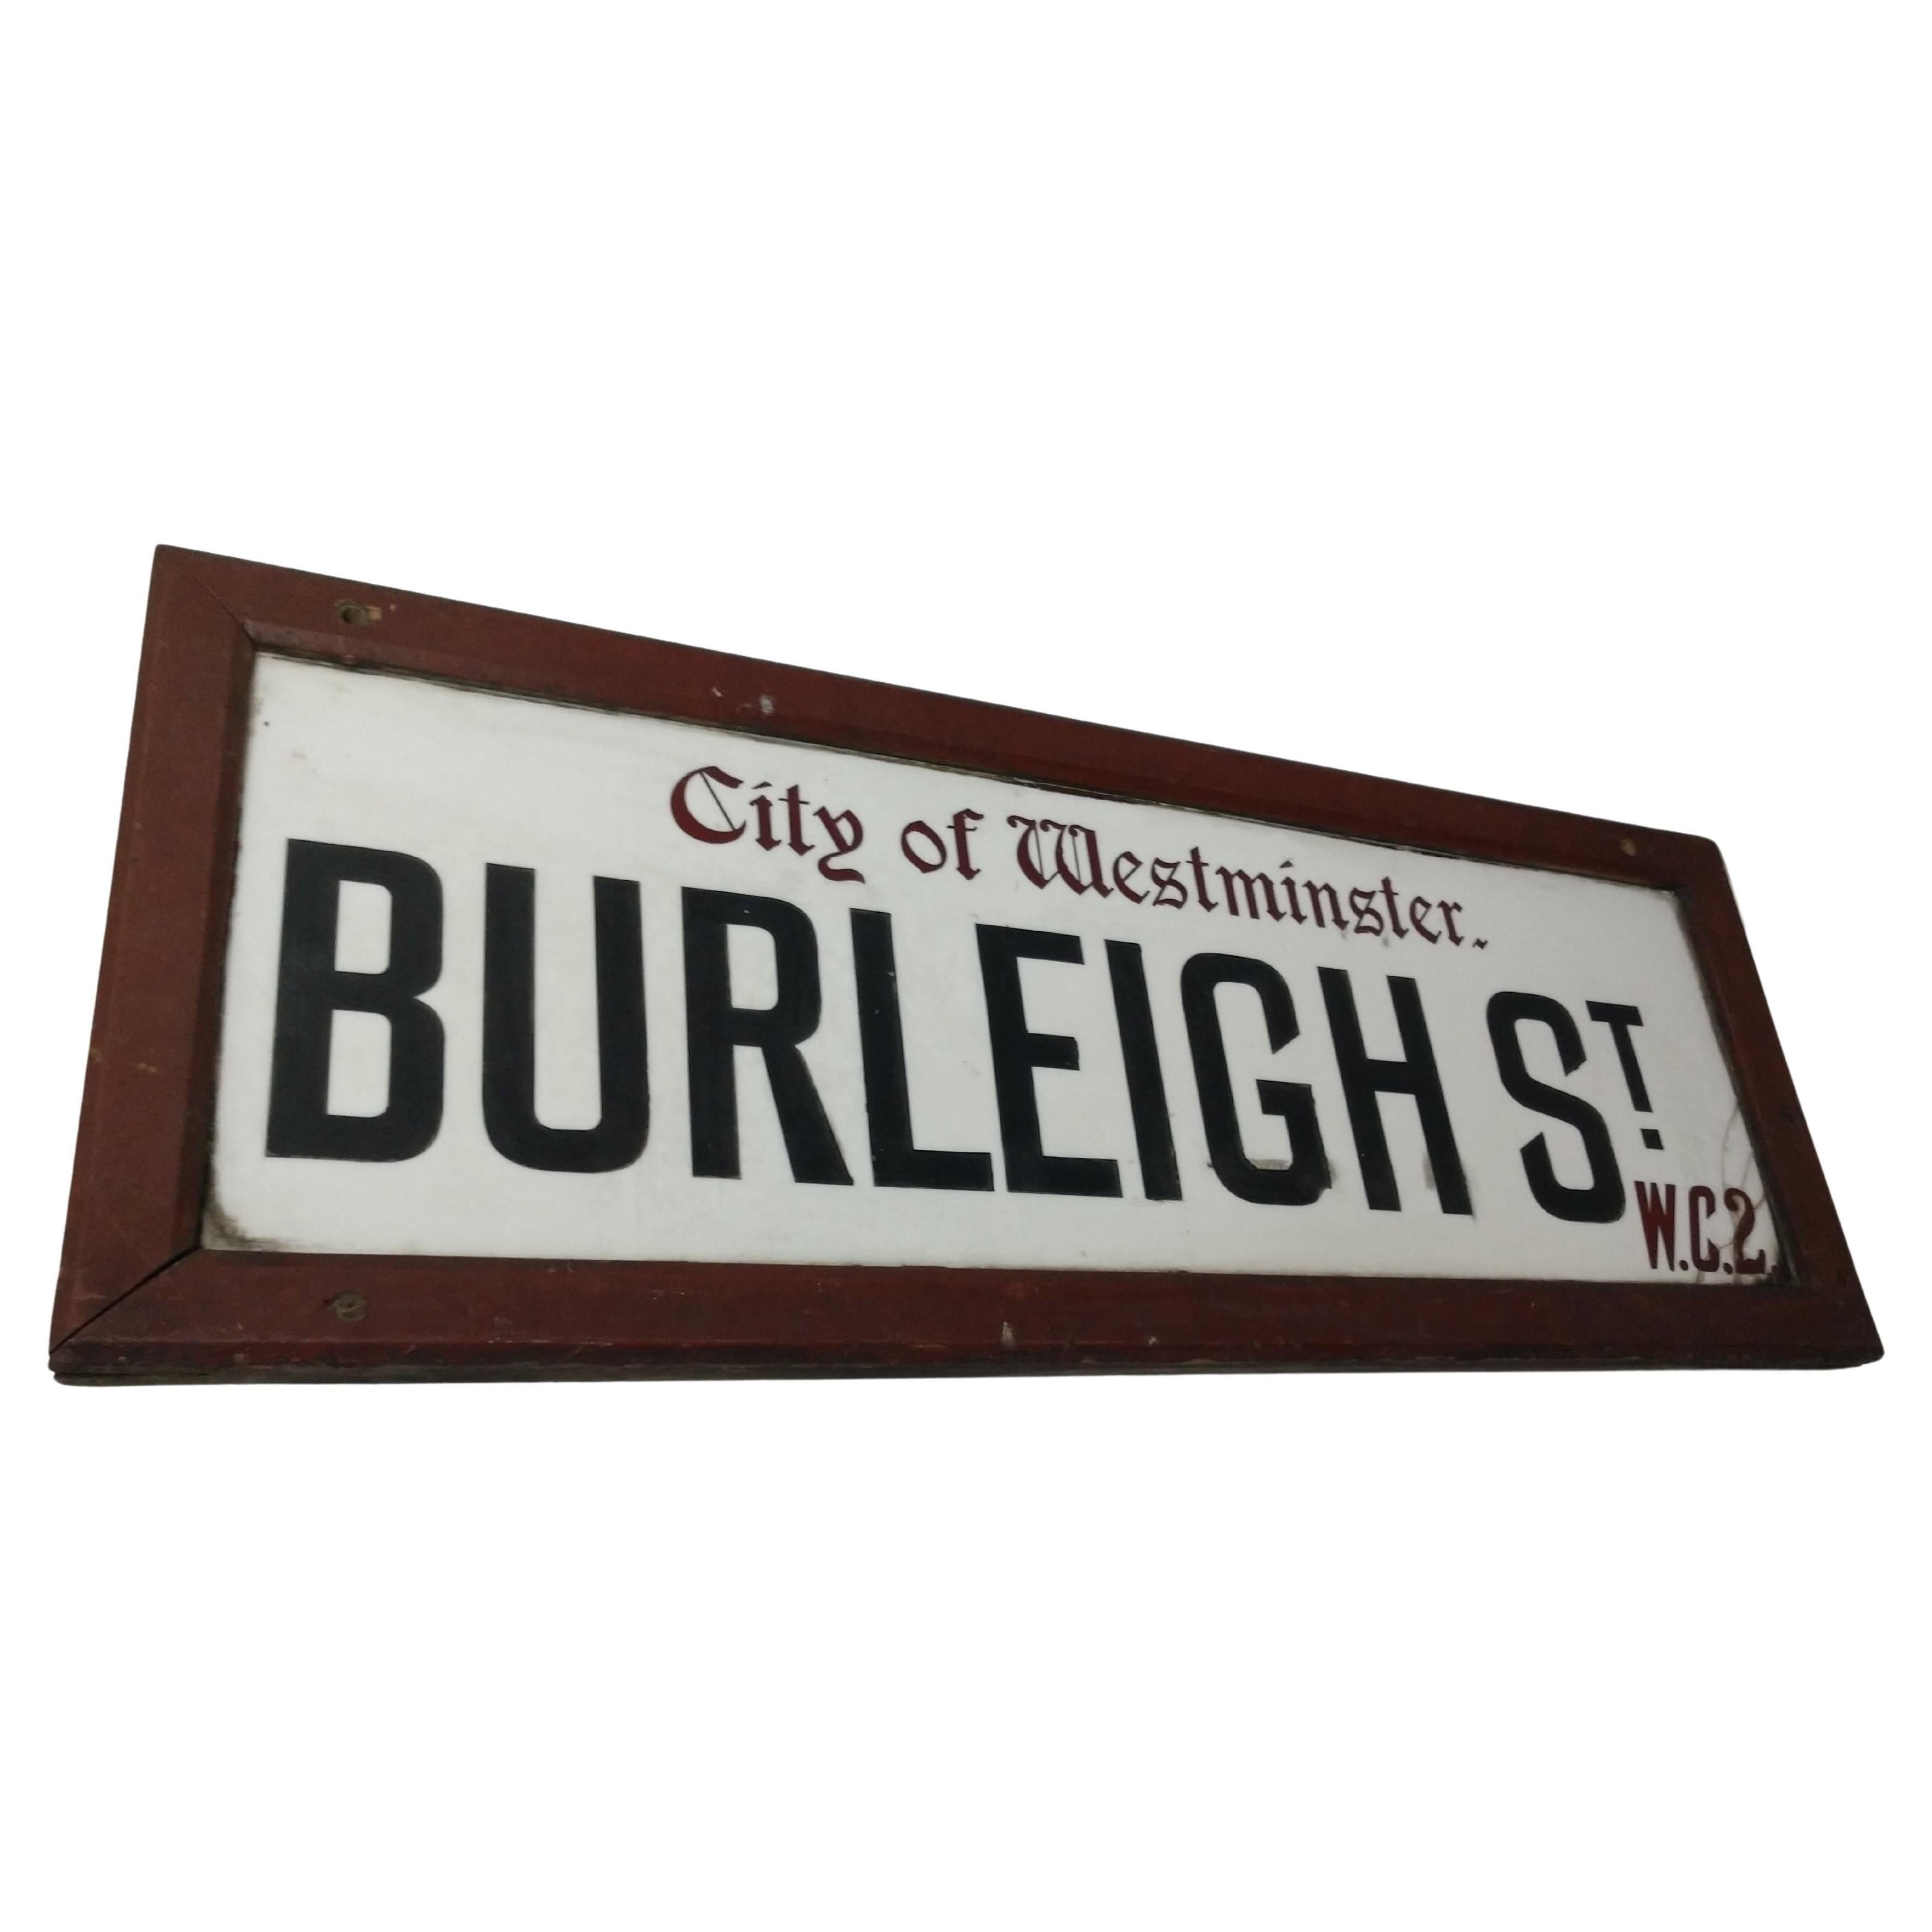 Fabulous early milk glass street sign from the City of Westminster London. Original wood frame in excellent vintage condition. A couple of cracks in the glass on right lower corner. Nothing missing. Pictured.
Burleigh St. W.C.2.